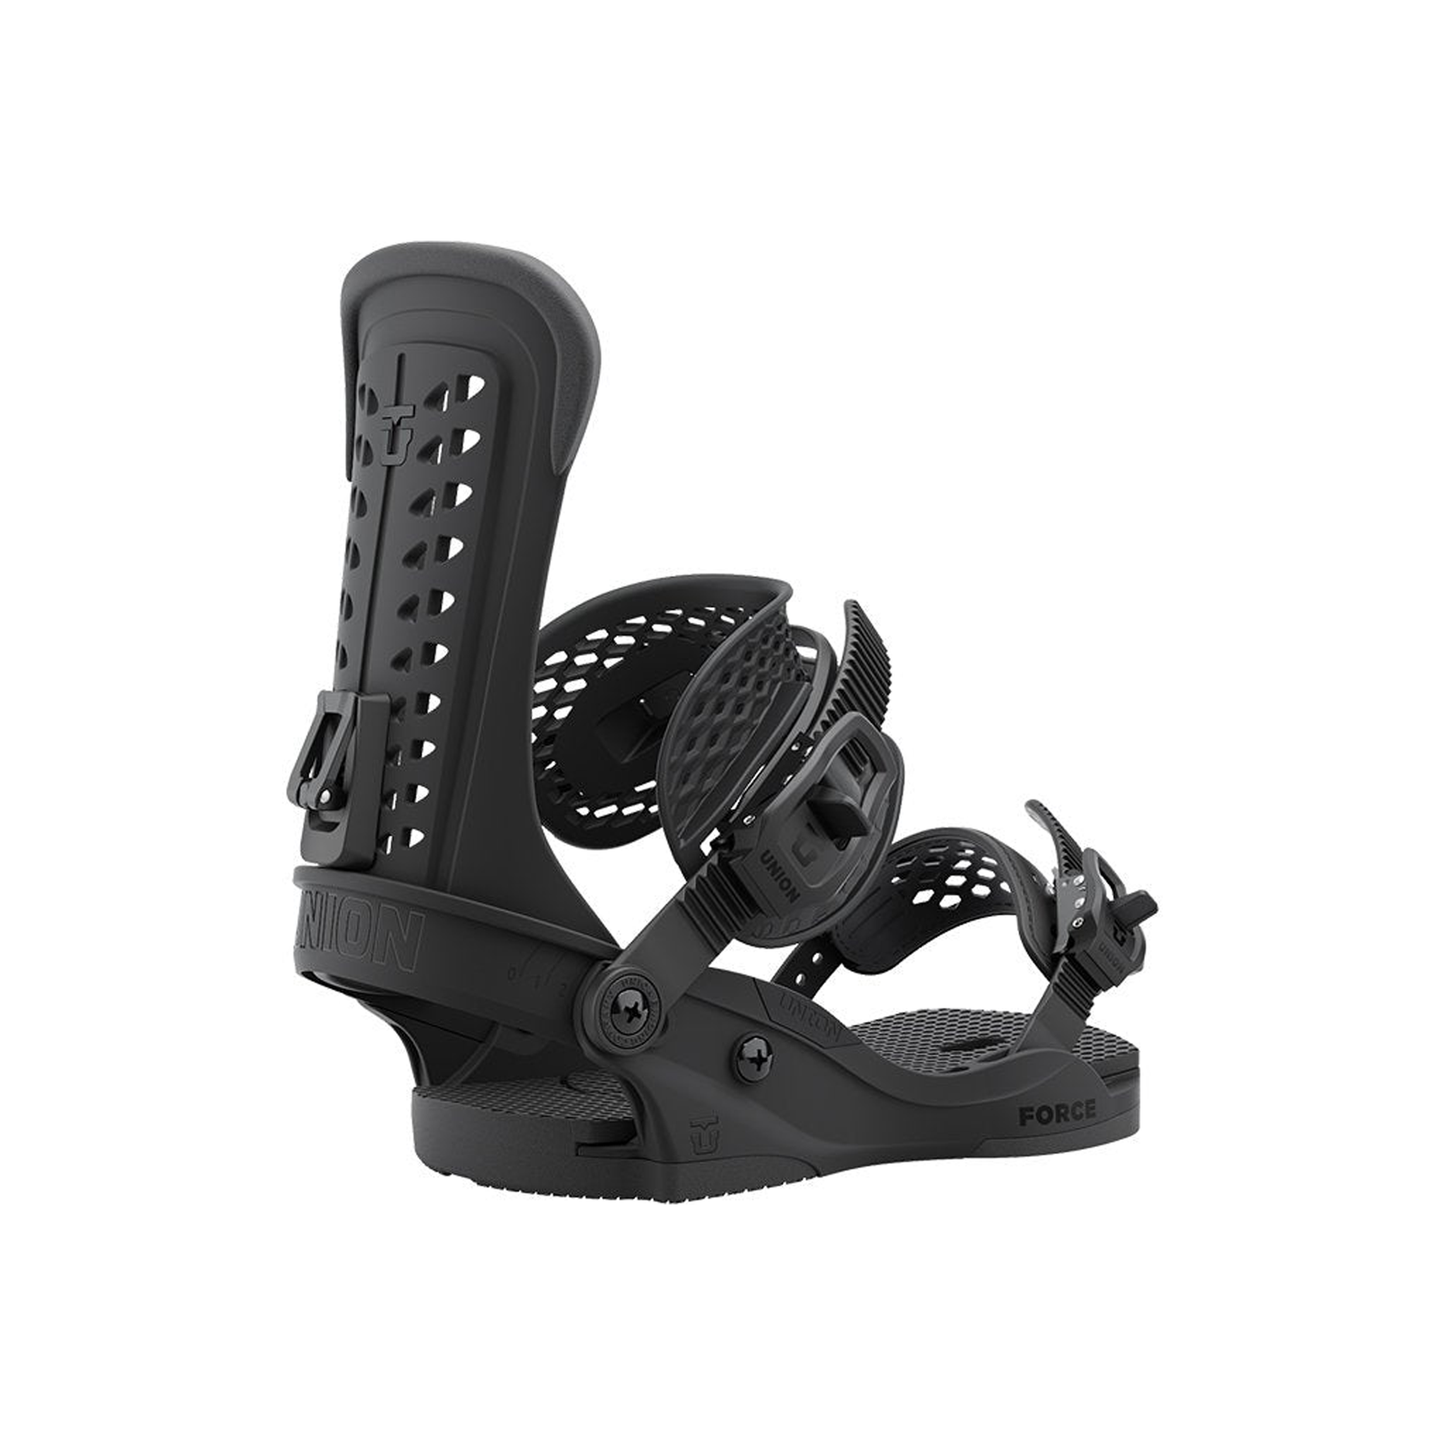 Back\Side view of the Union force snowboard binding in the colour black